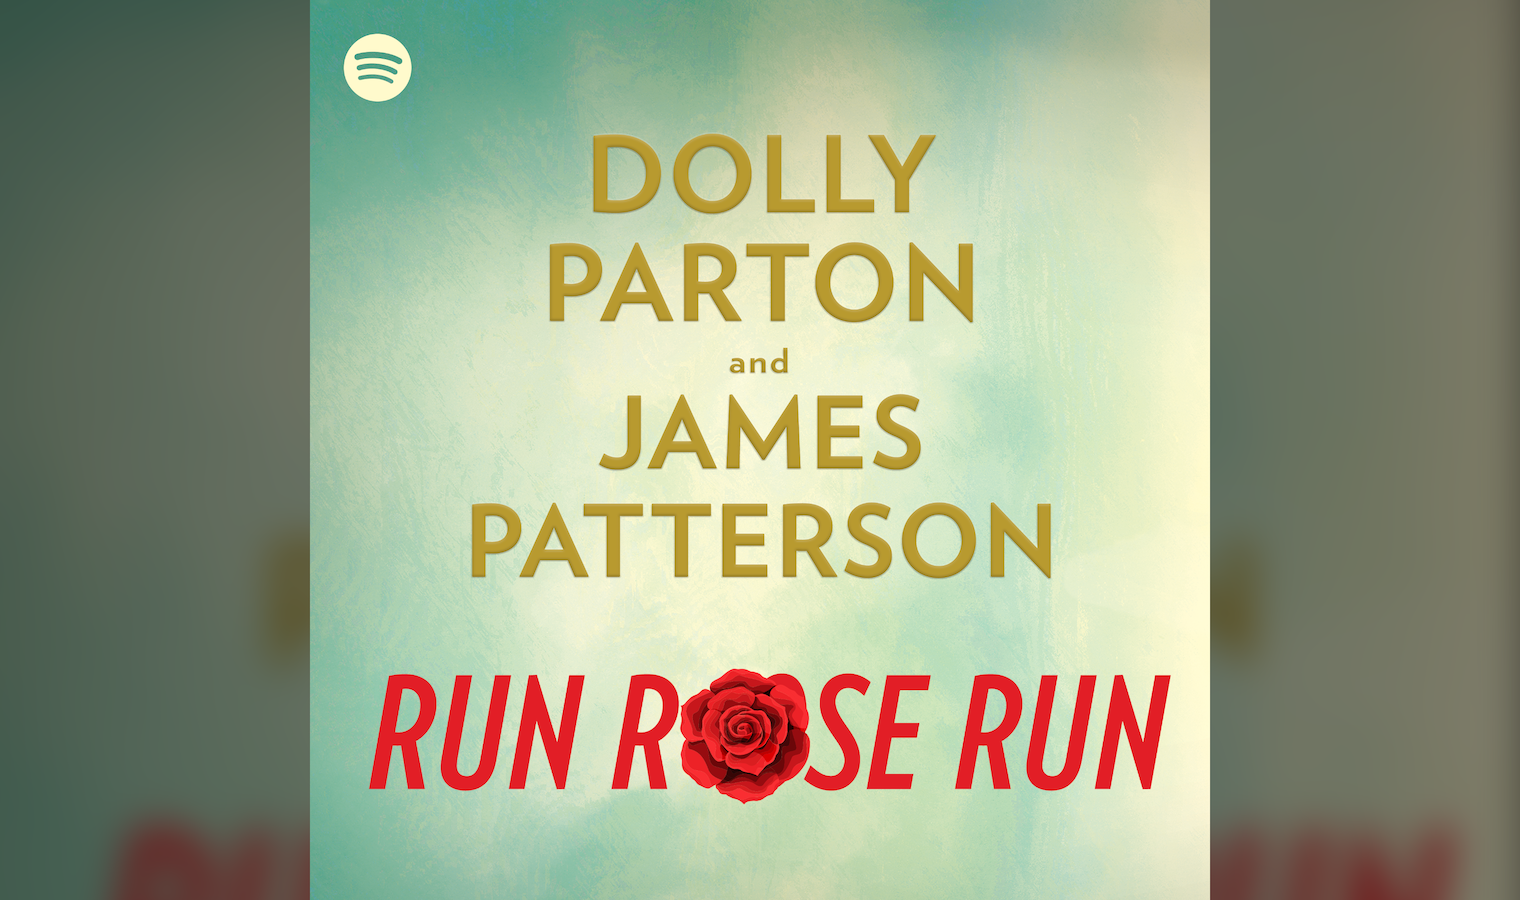 Spotify continue to explore audiobooks: Dolly Parton and James Patterson collaborate on a new Bookcast audio experience